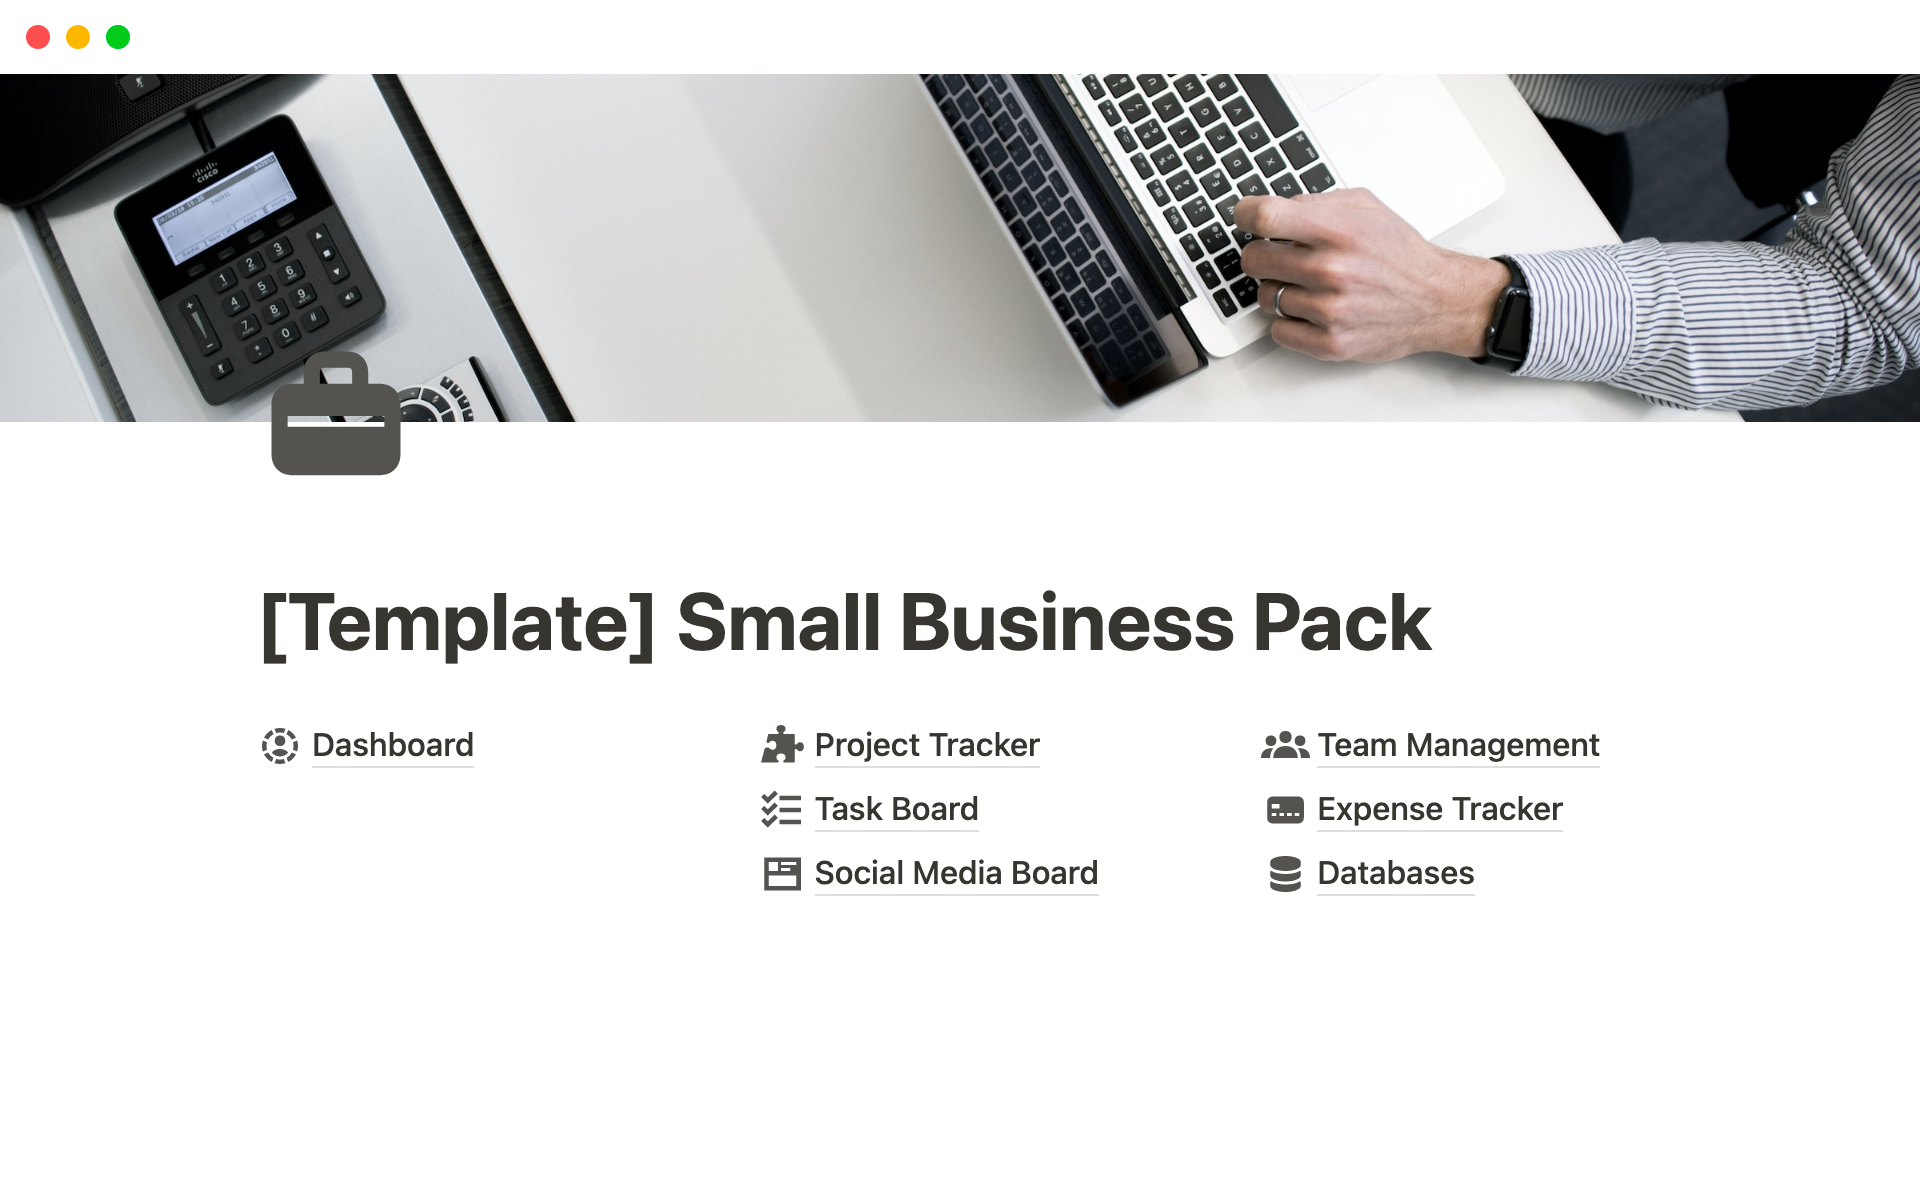 Helps small business owners manage their business.